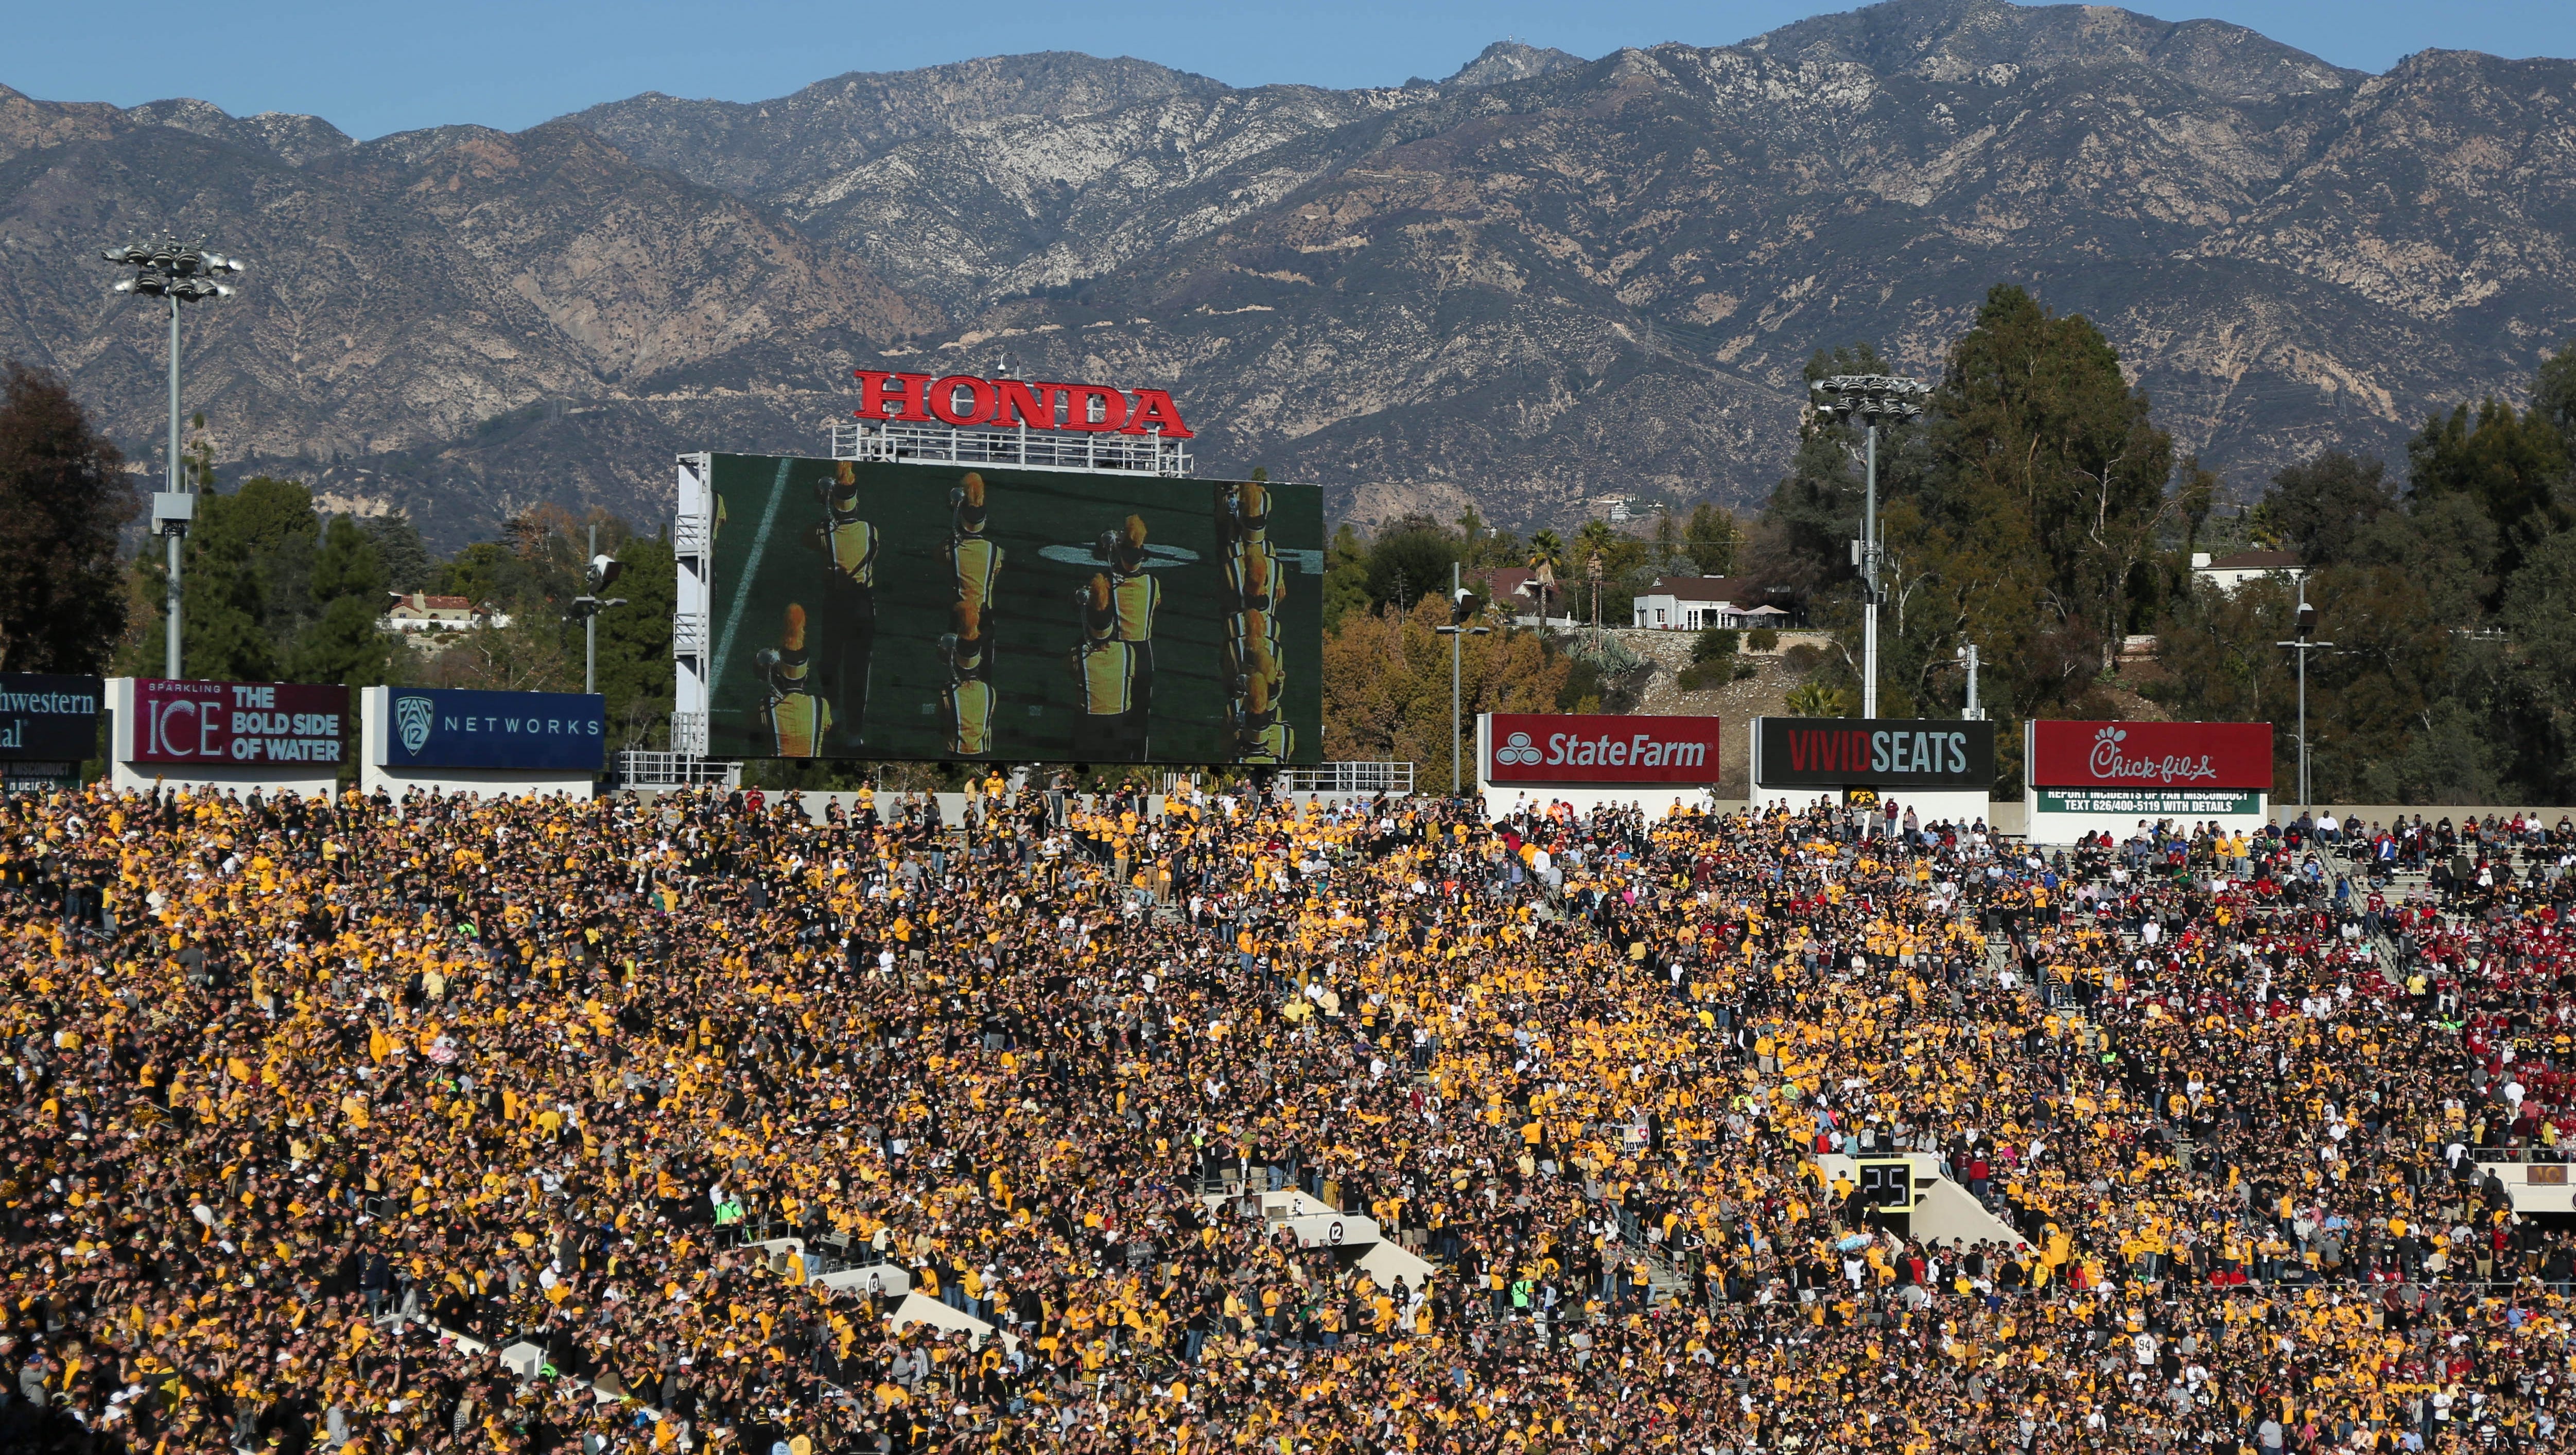 Iowa and Stanford fans fill the stadium on Friday, Jan. 1, 2016, at the Rose Bowl in Pasadena, Calif.